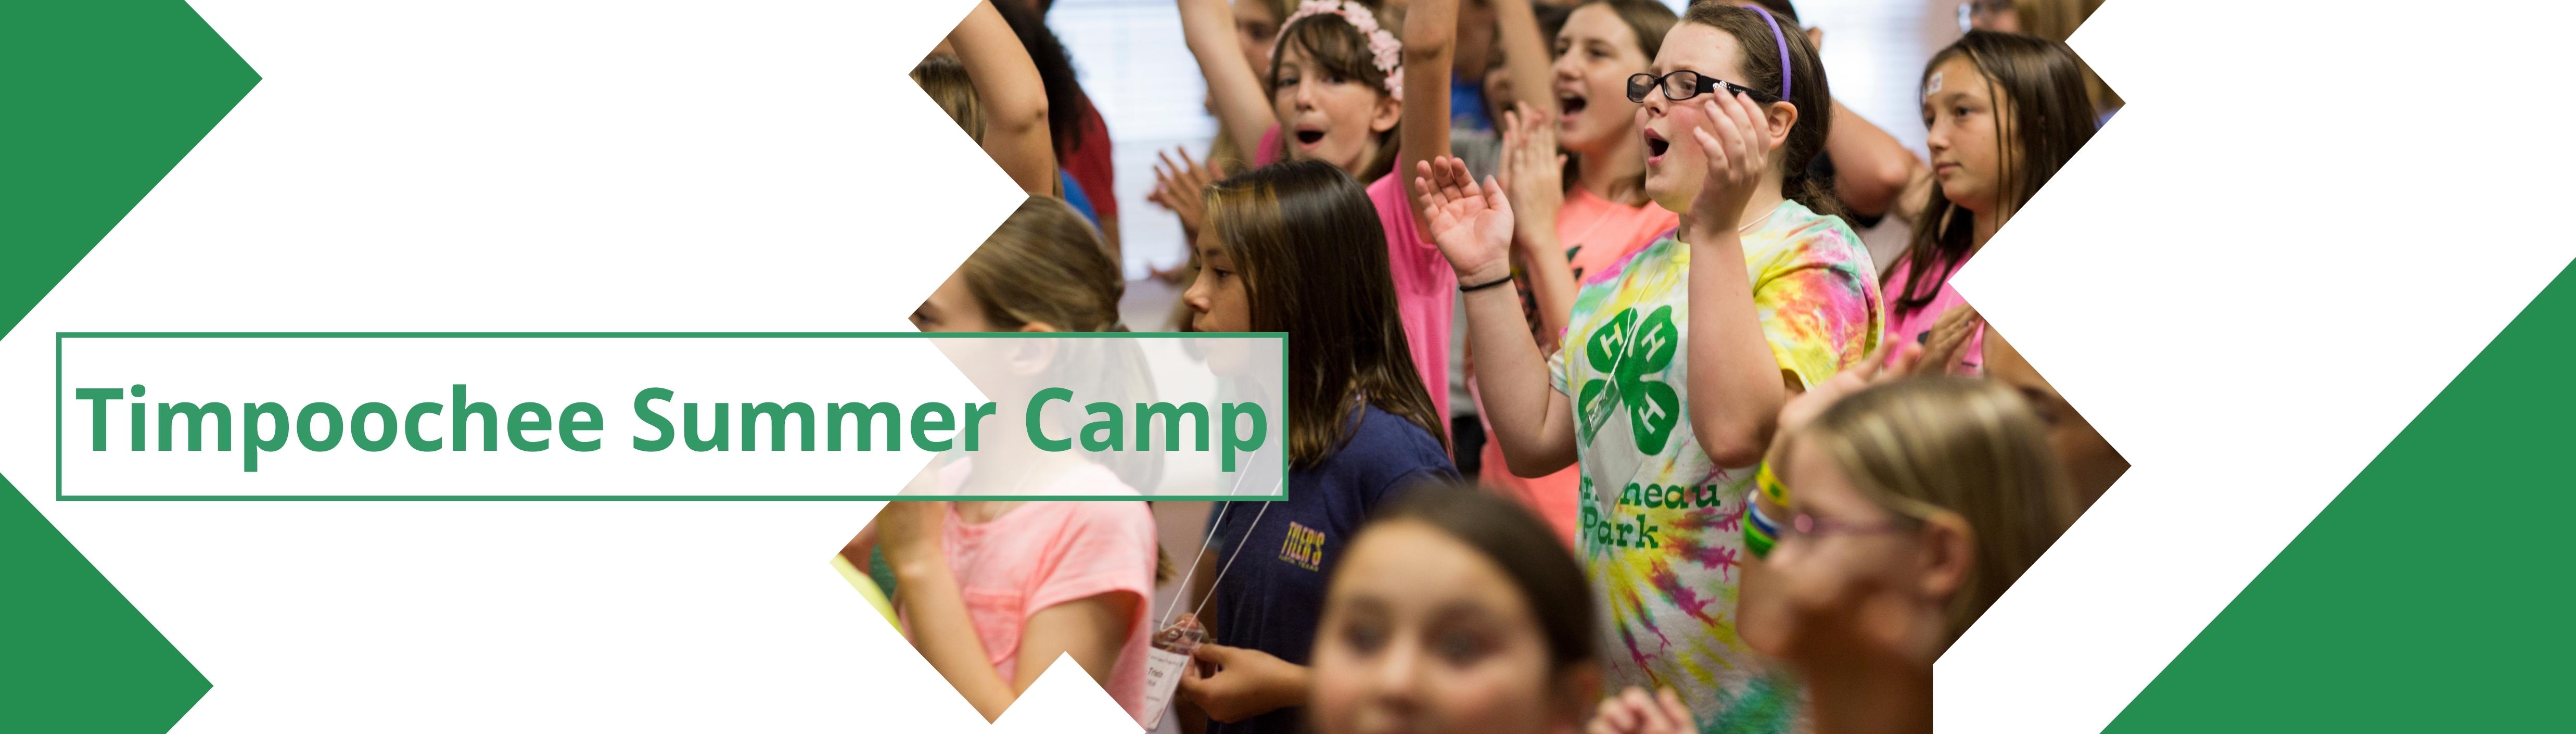 Banner image of youth at camp